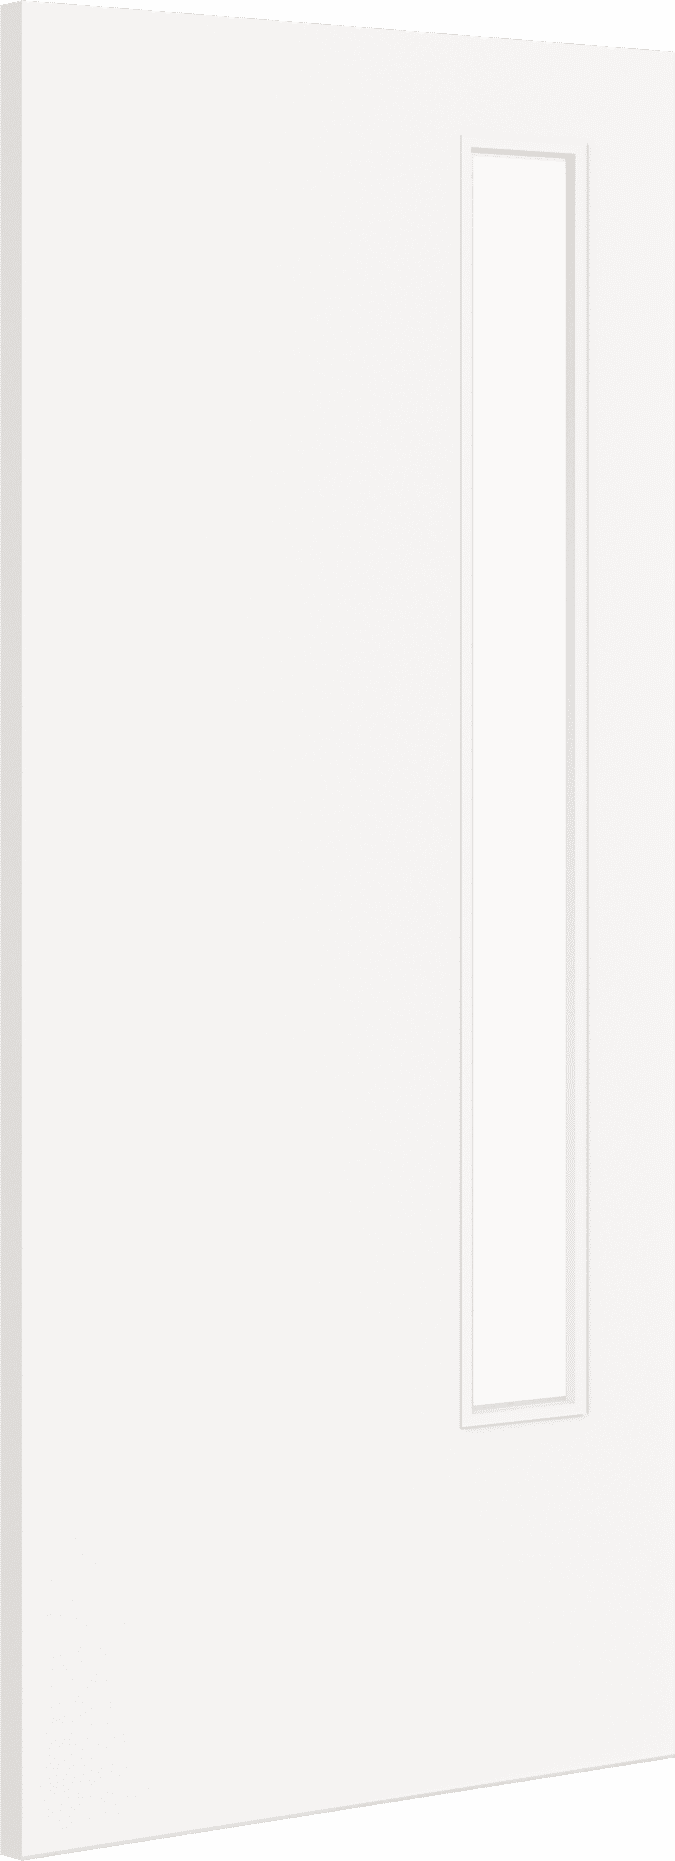 2040mm x 626mm x 44mm Architectural Paint Grade White 13 Clear Glazed Fire Door Blank